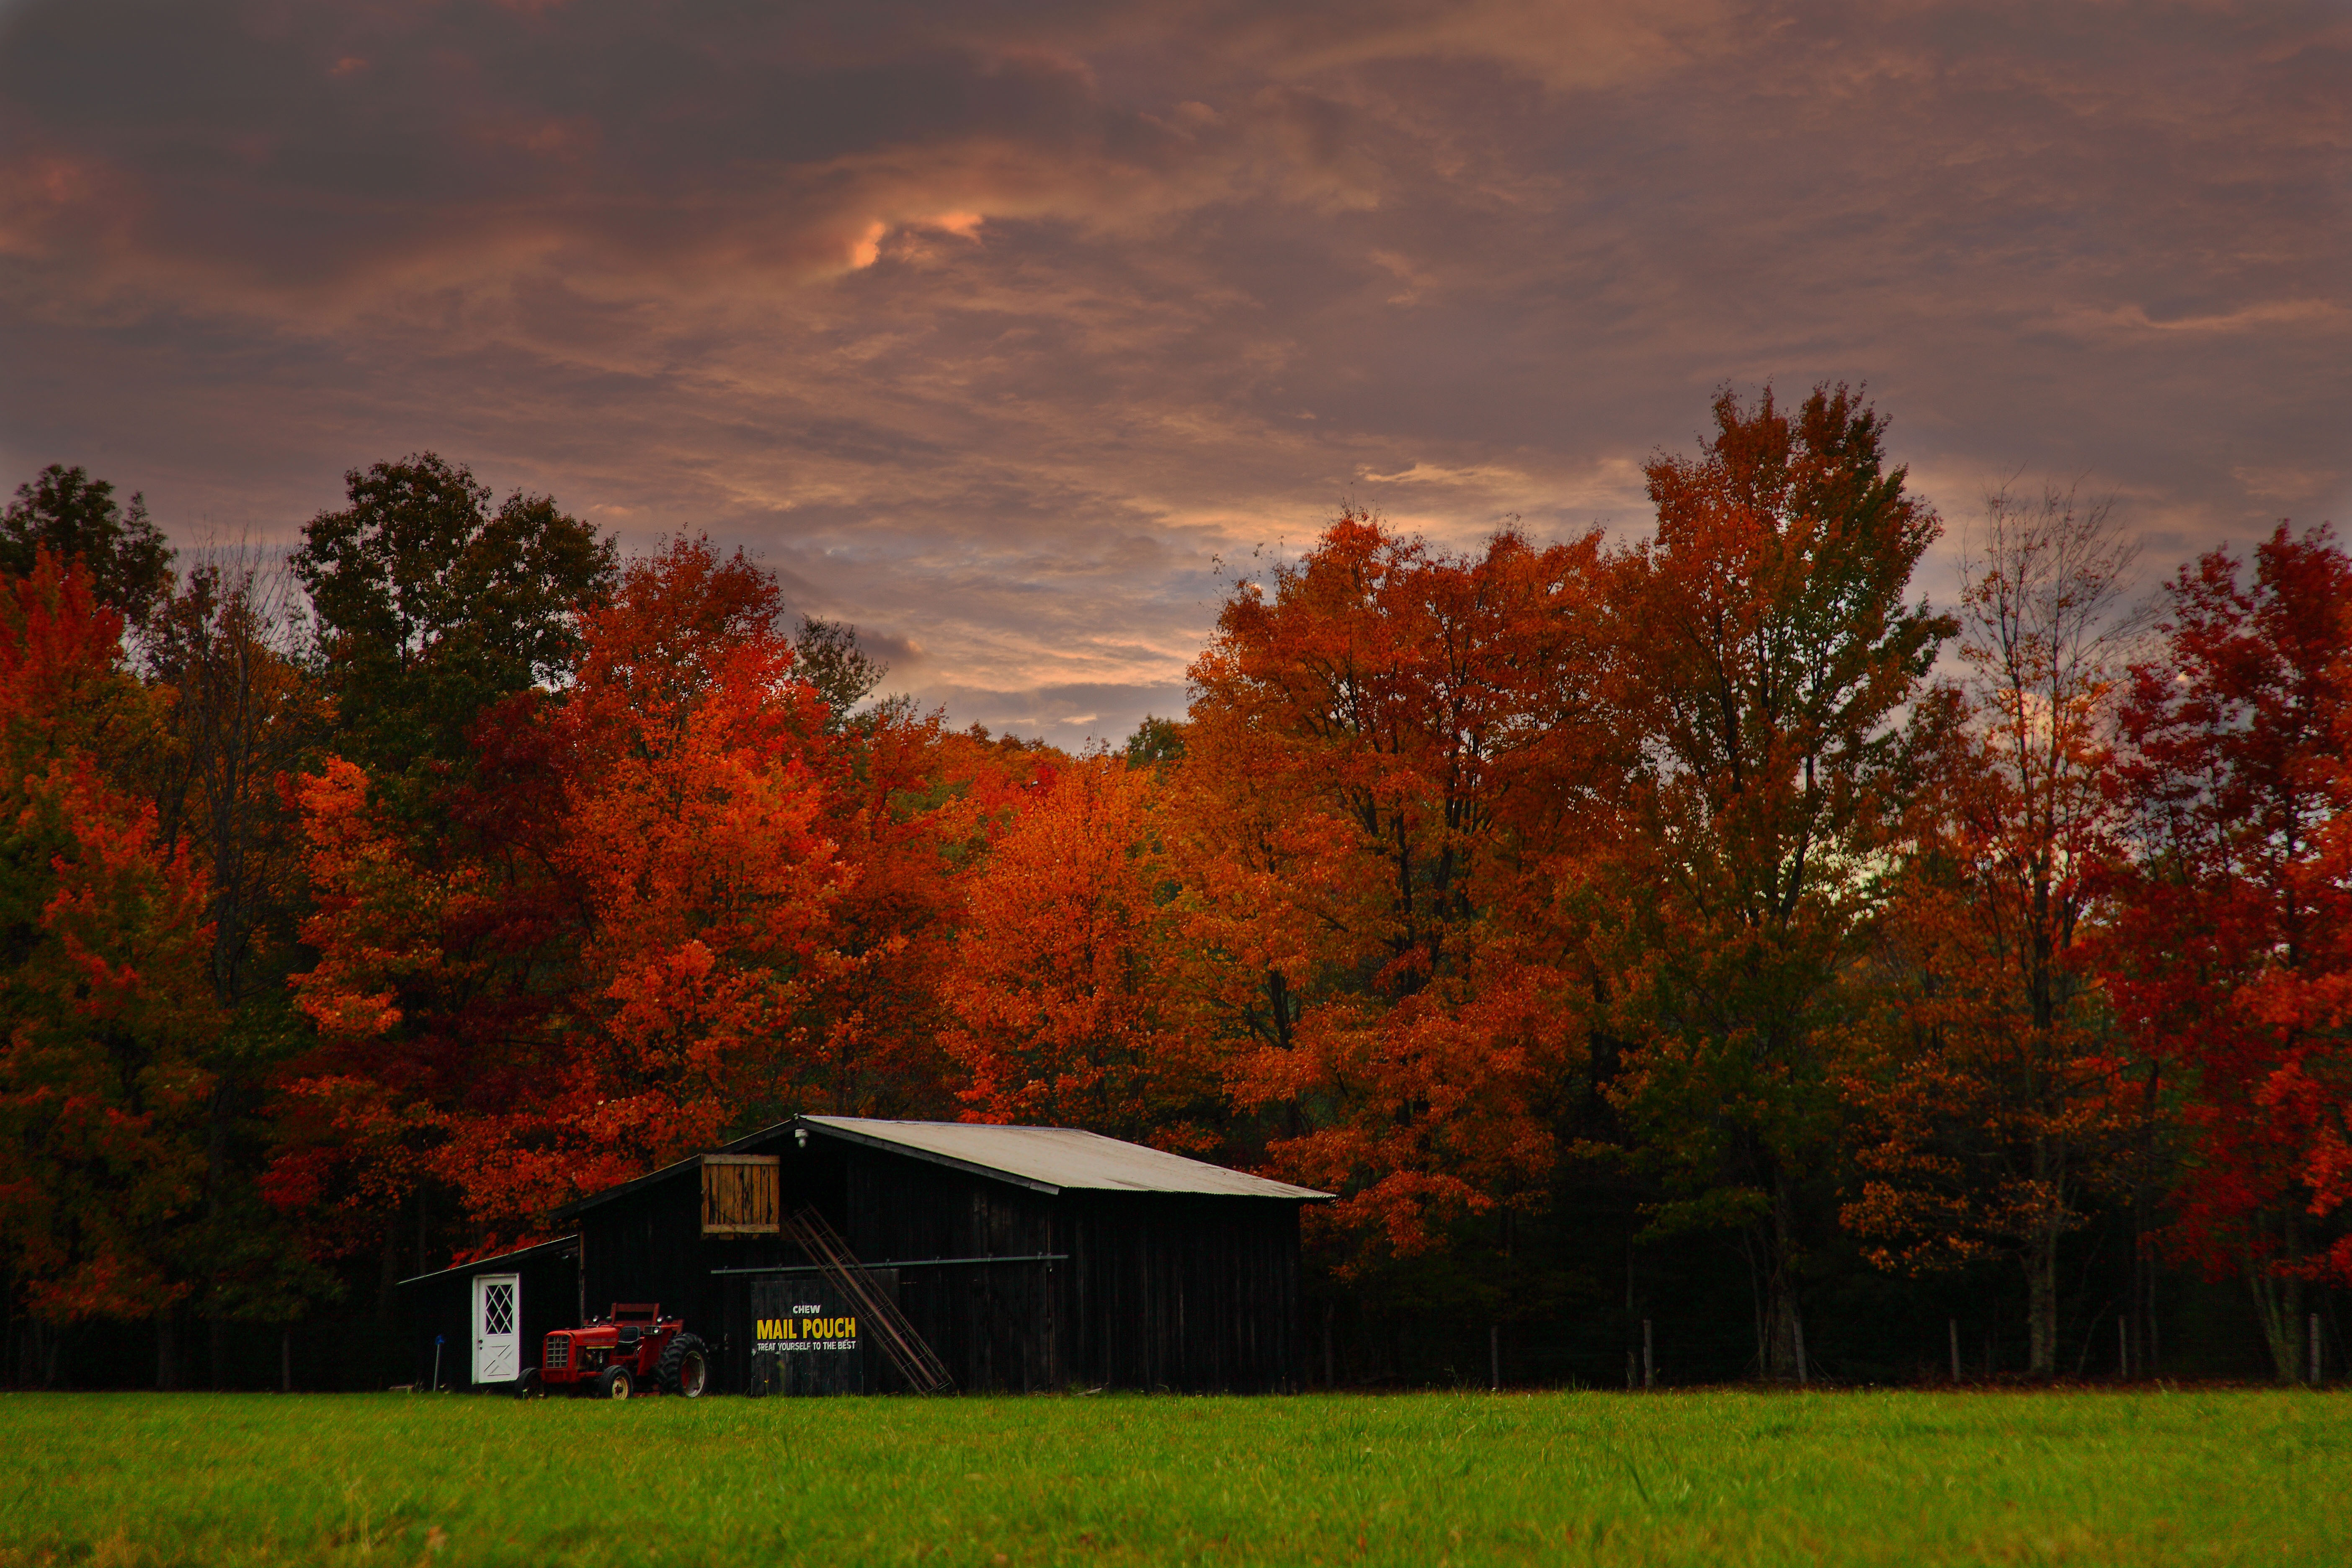 Scene Of A Mail Pouch Barn On Country Farm Behind The Fall